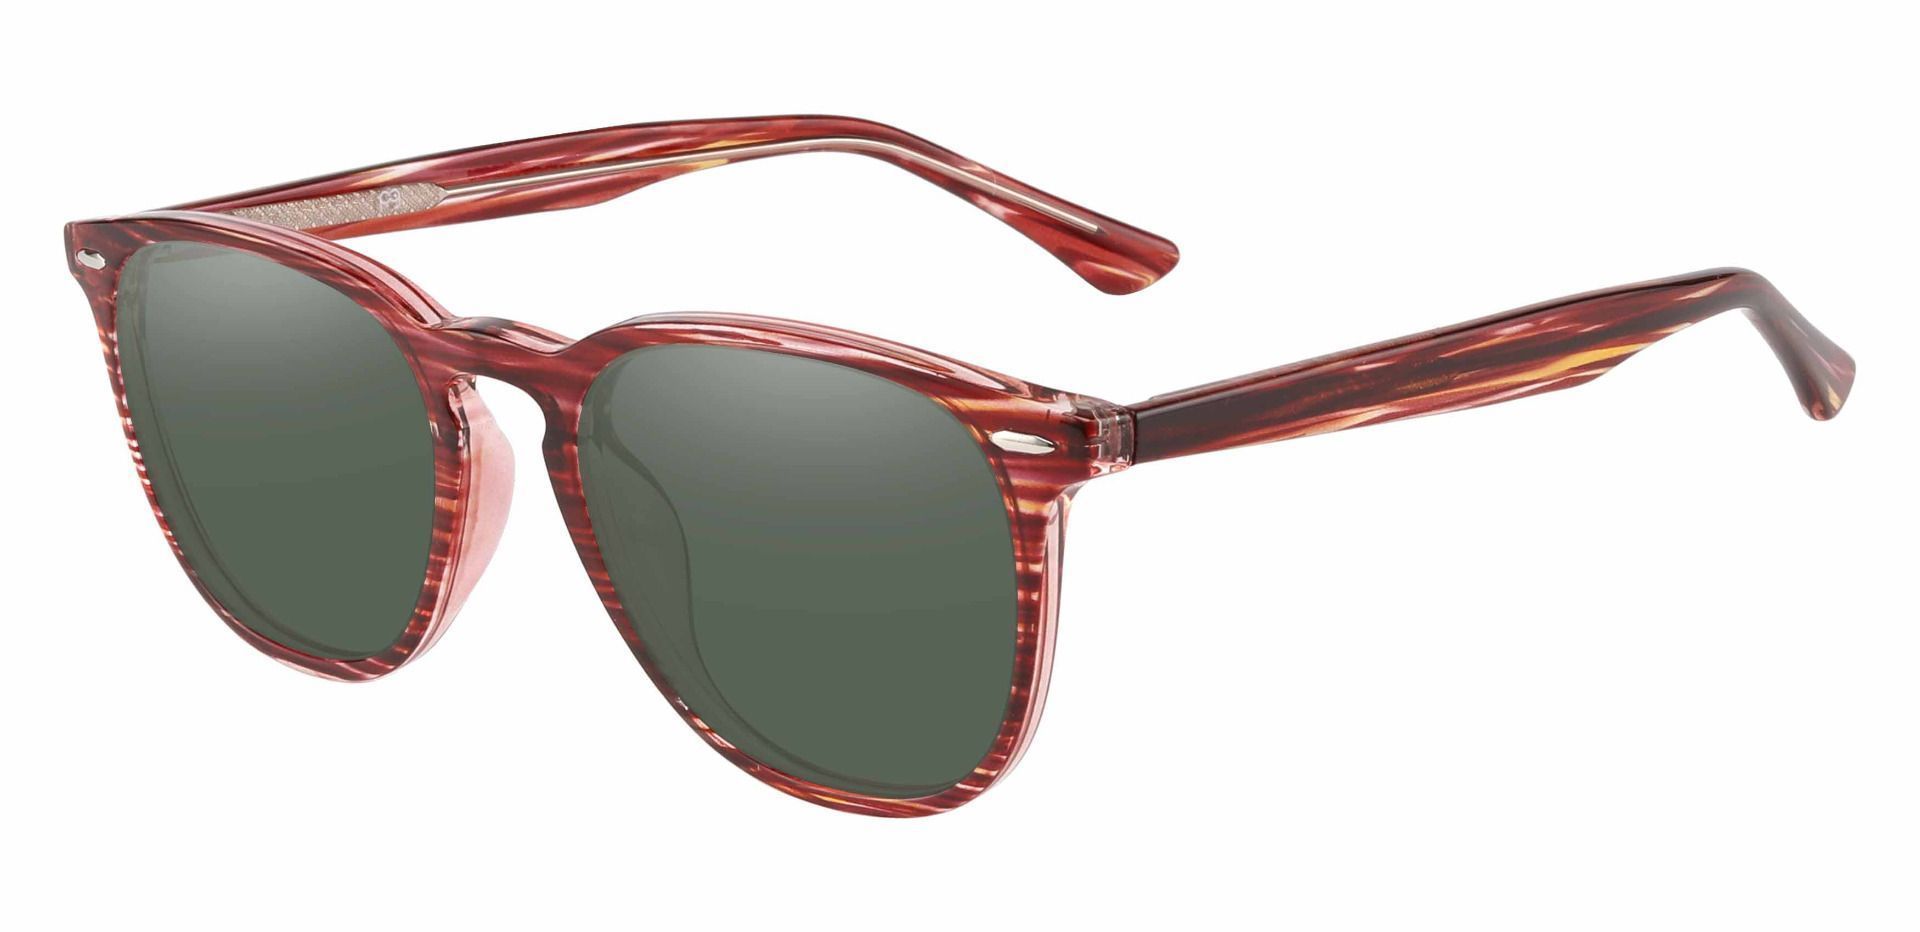 Sycamore Oval Lined Bifocal Sunglasses - Red Frame With Green Lenses